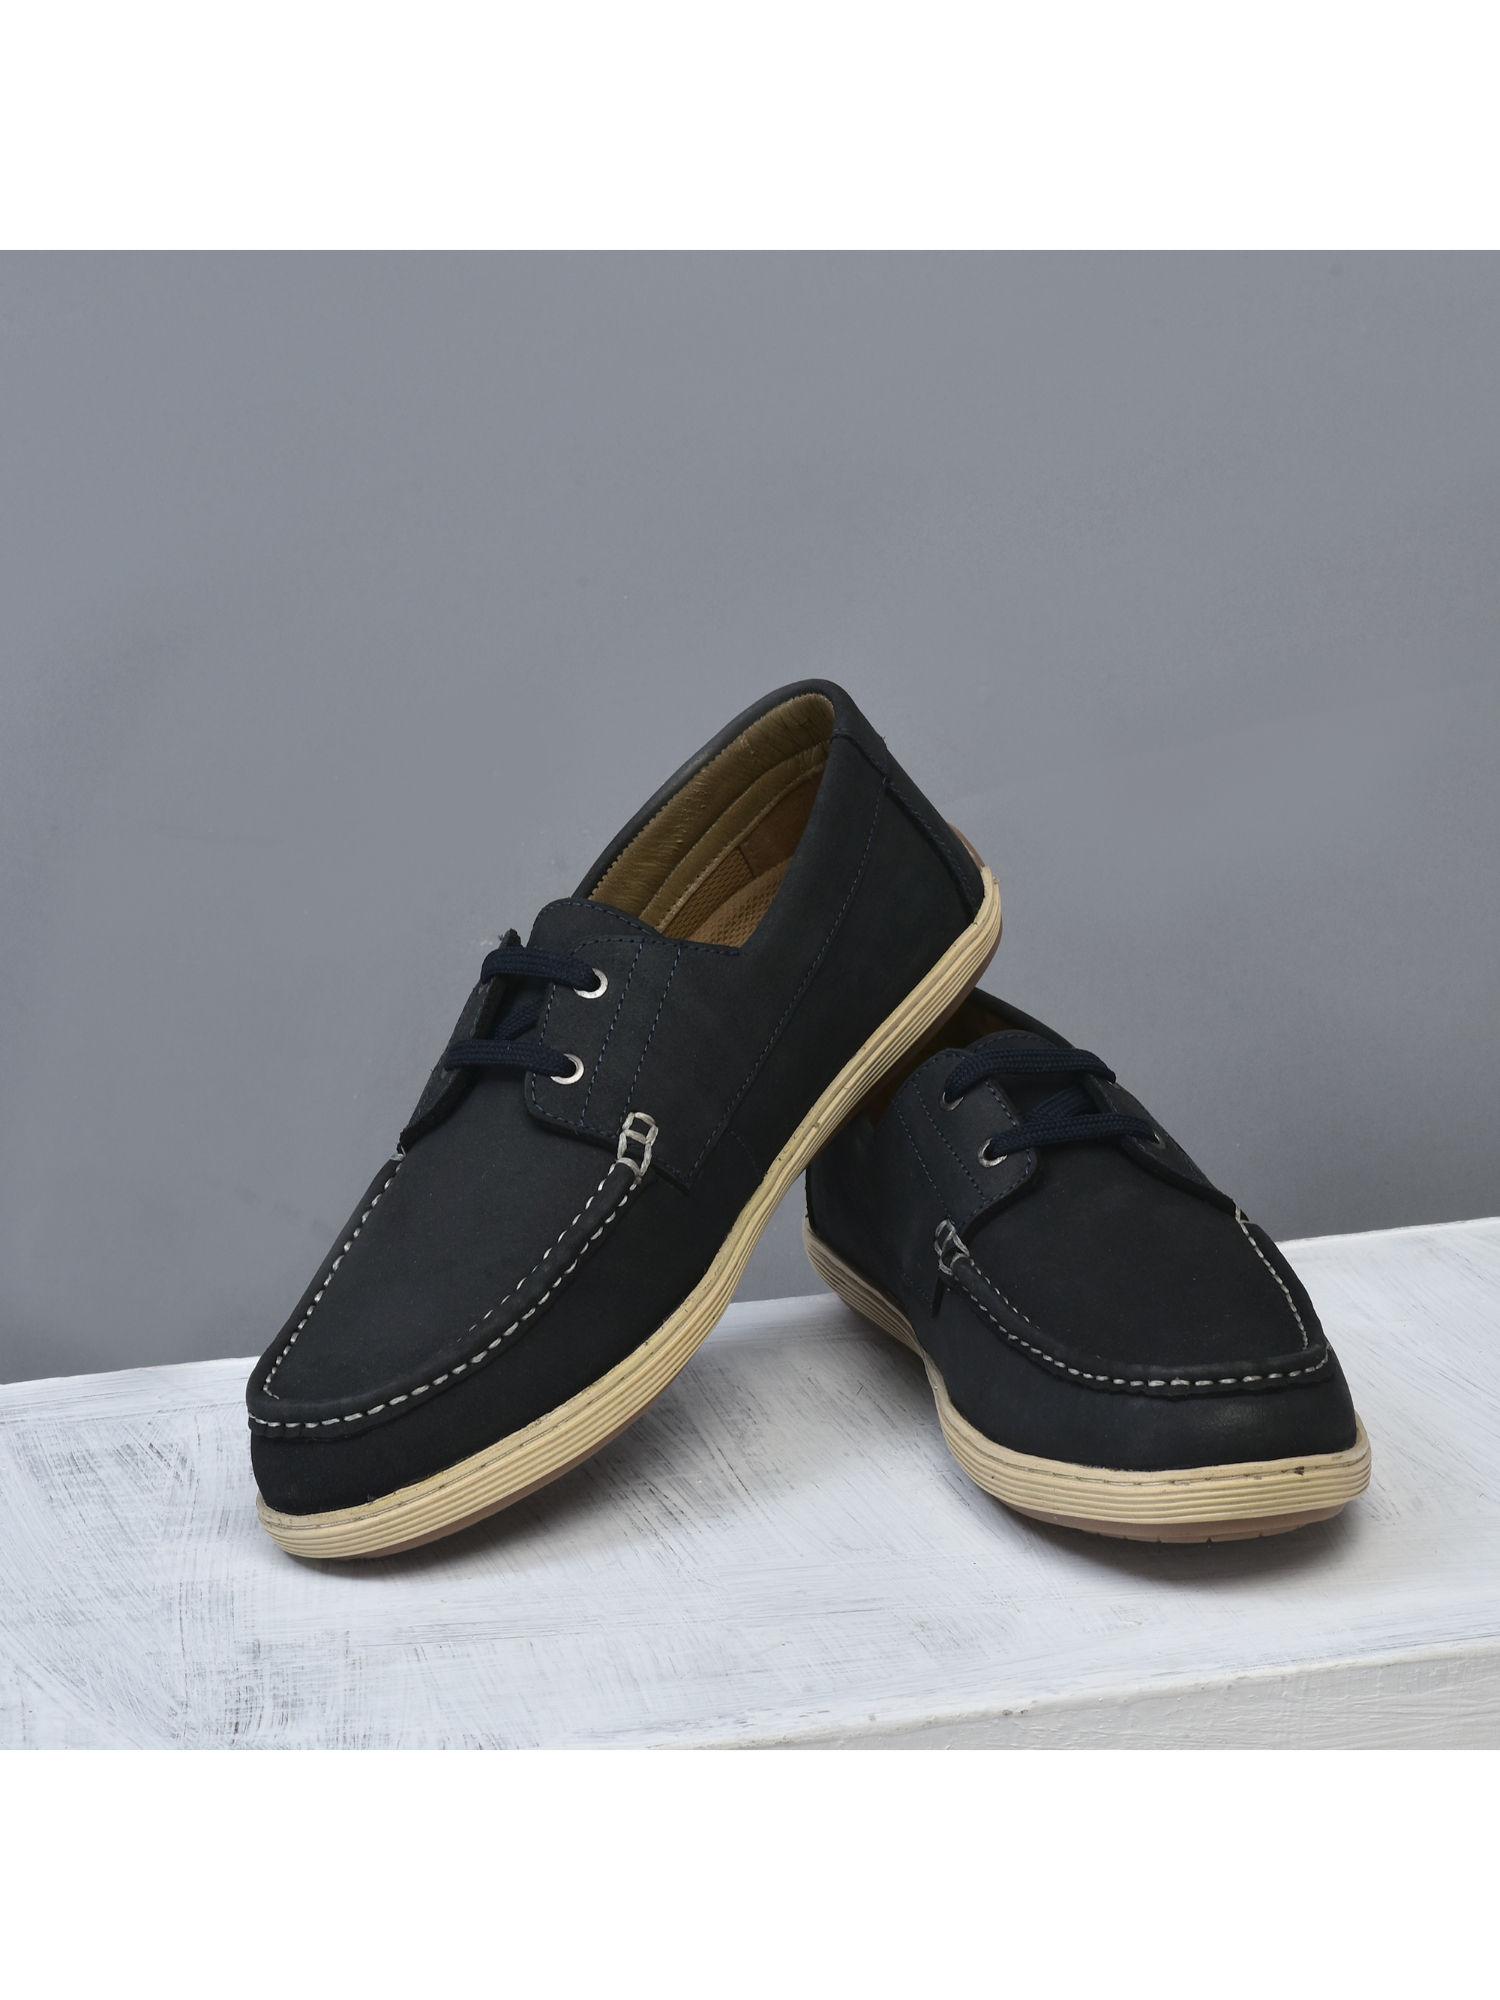 mens-navy-blue-casual-boat-shoes